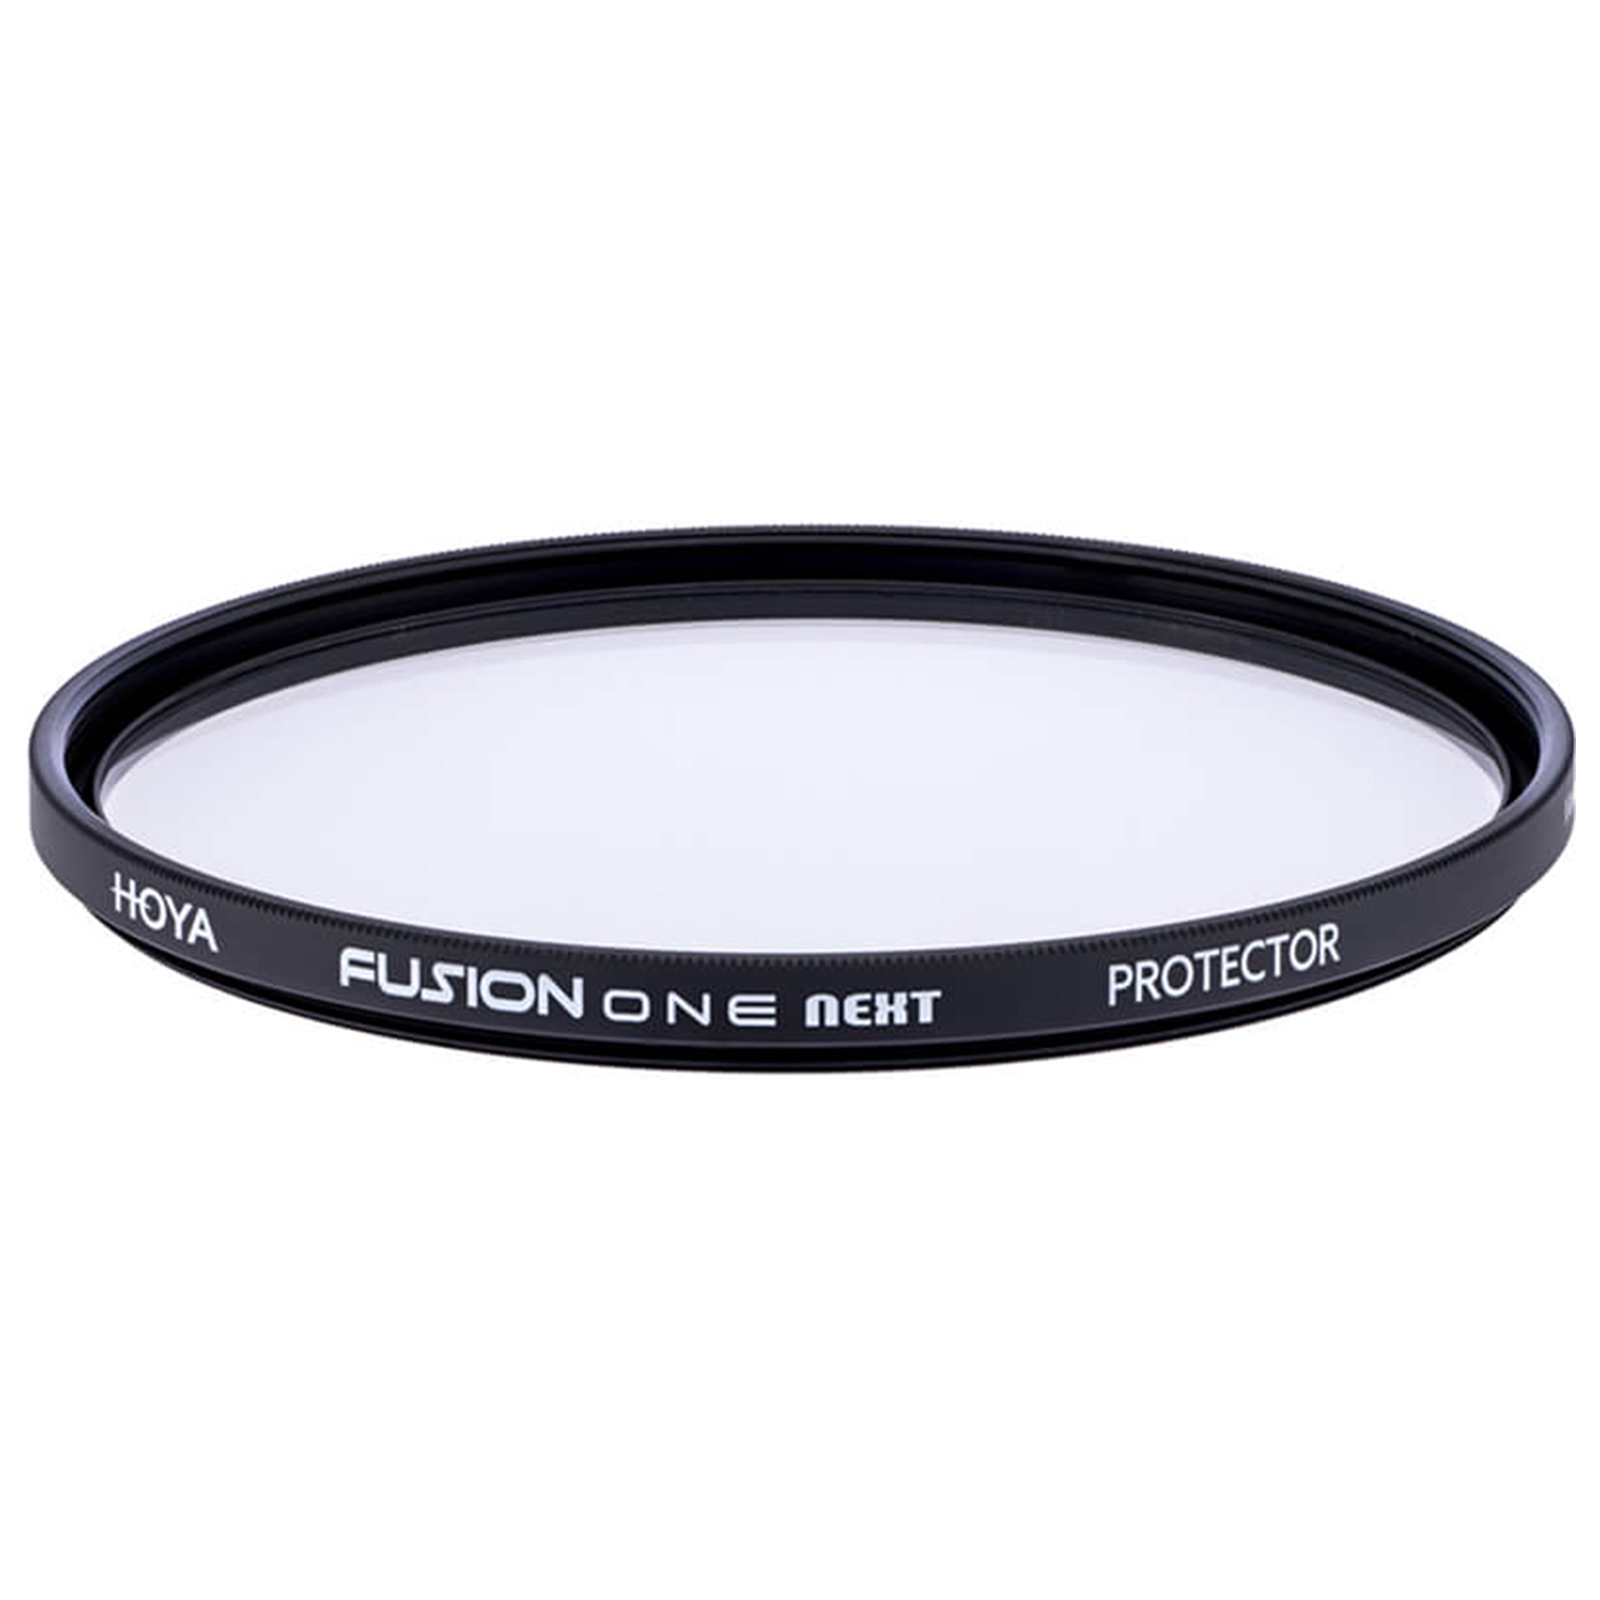 Image of Hoya 77mm Fusion AS Next Protector Filter